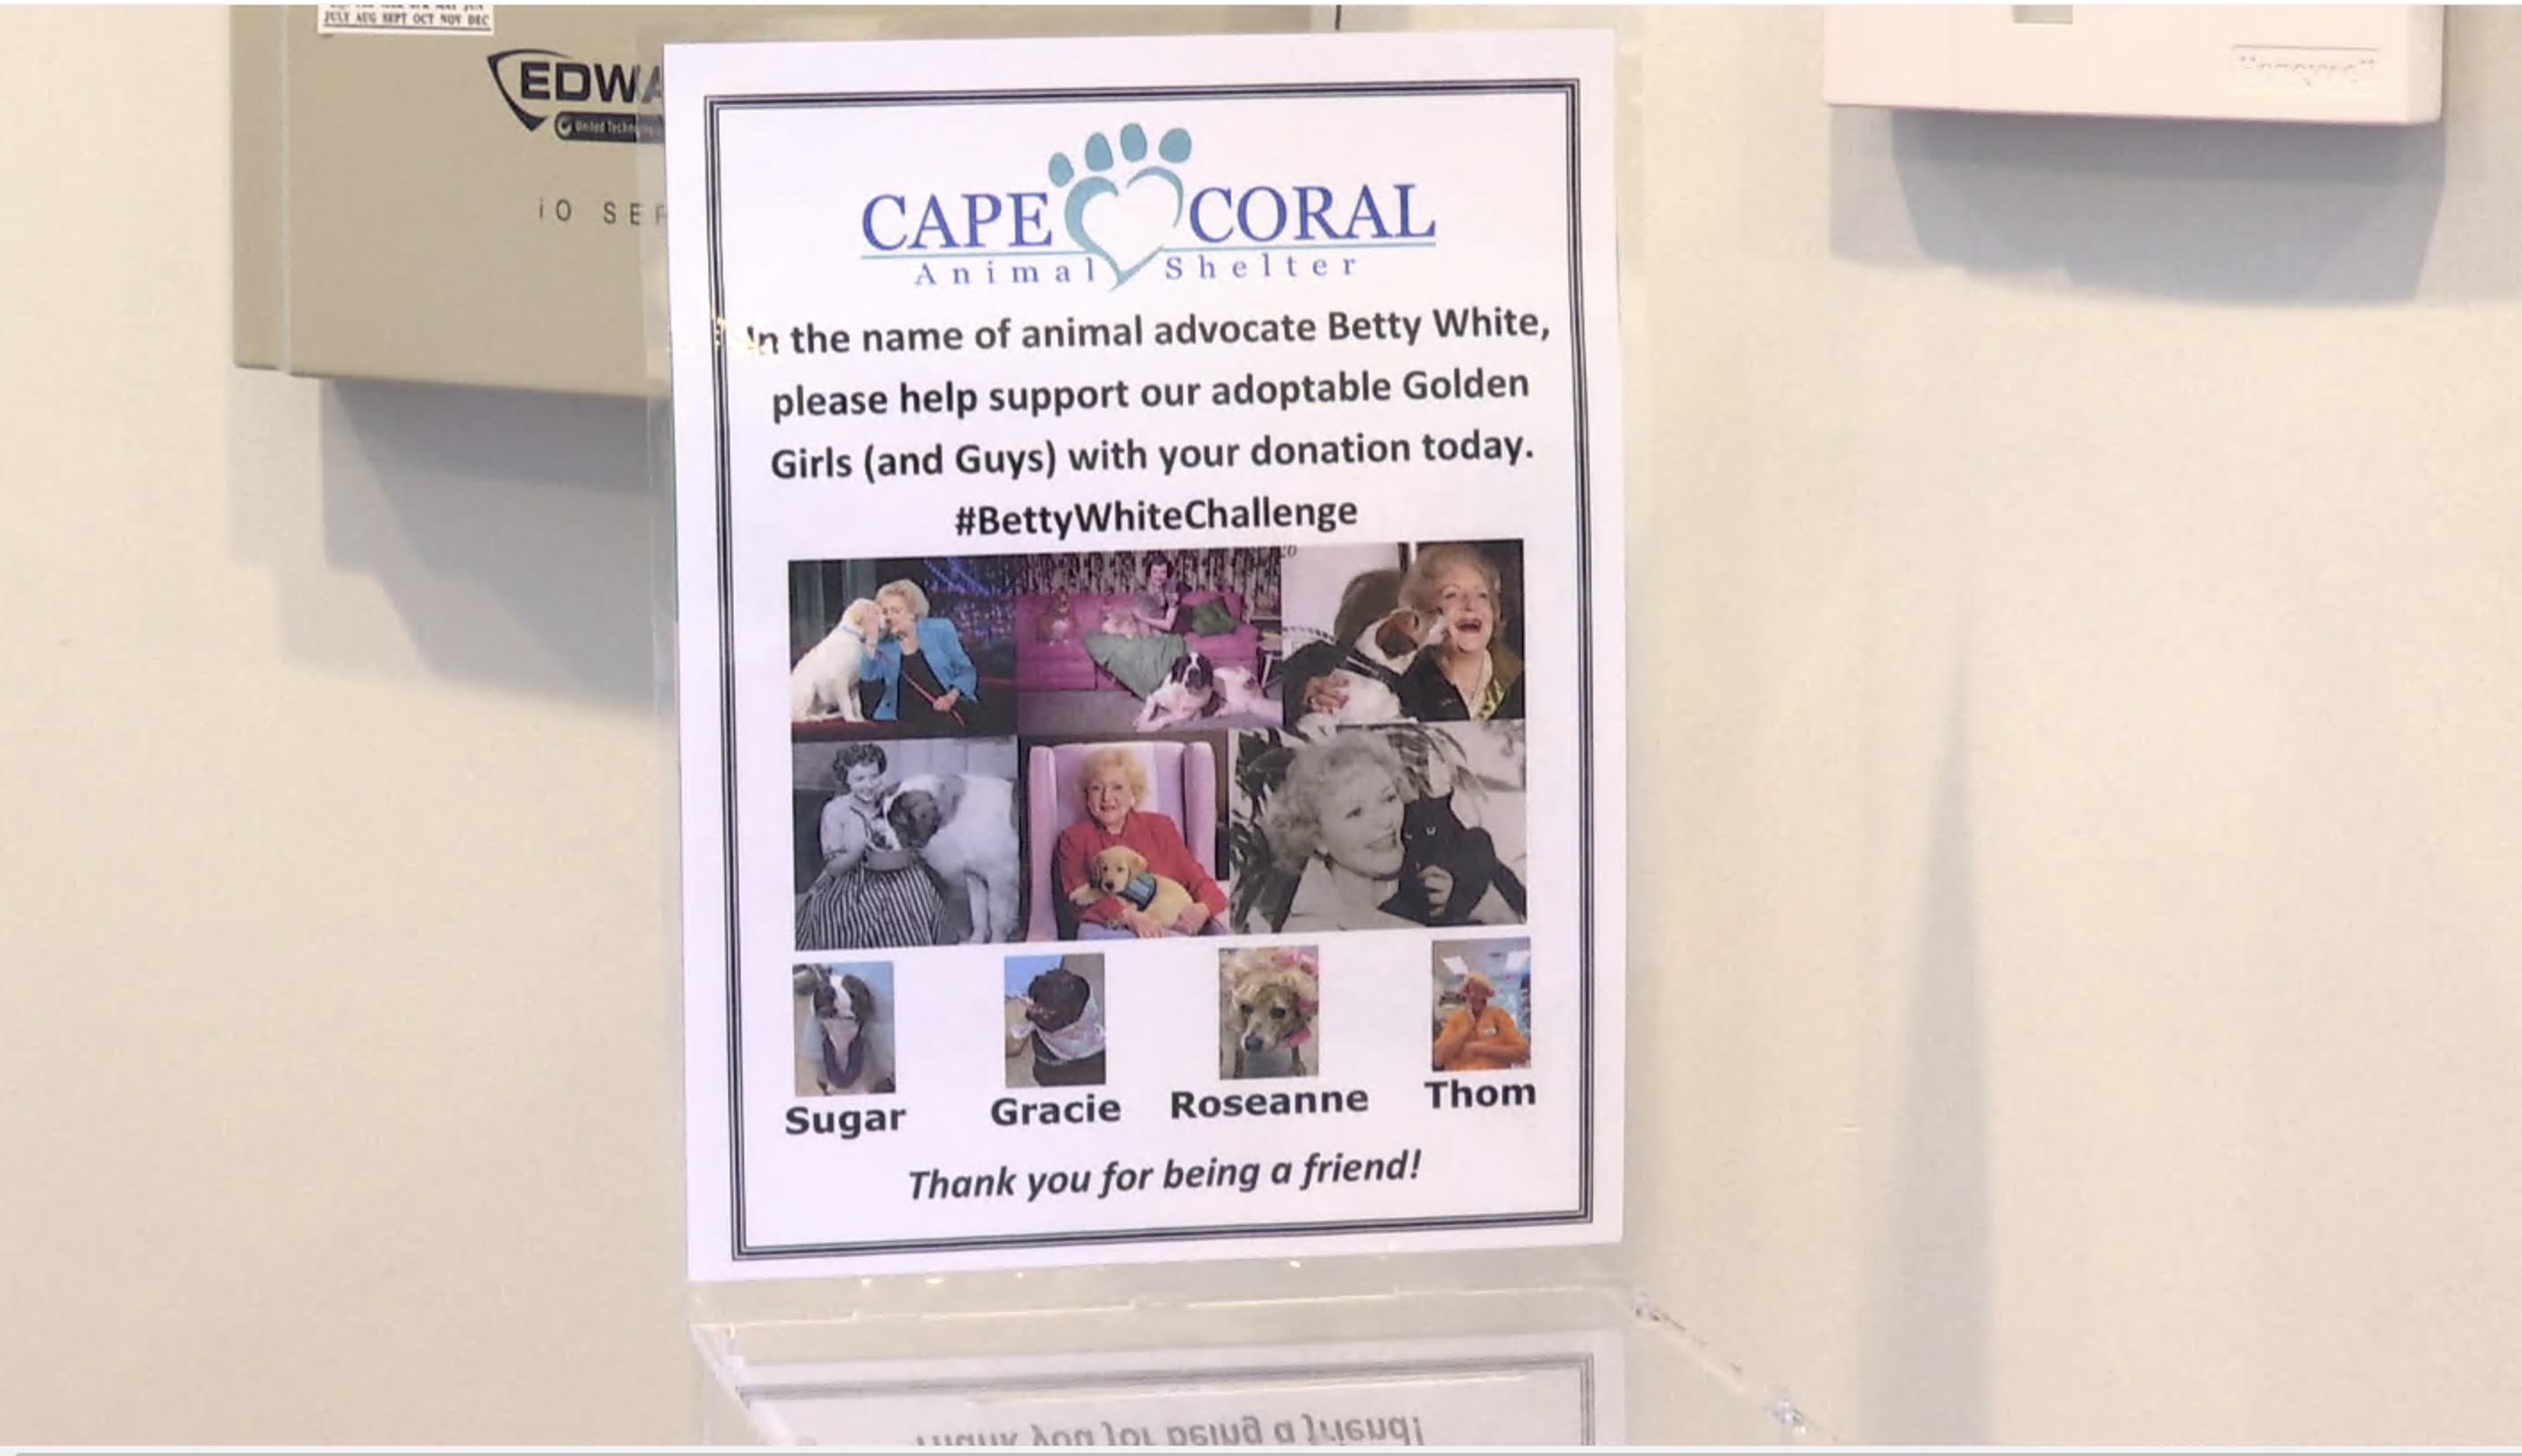 "Betty White Challenge" at Cape Coral Animal Shelter